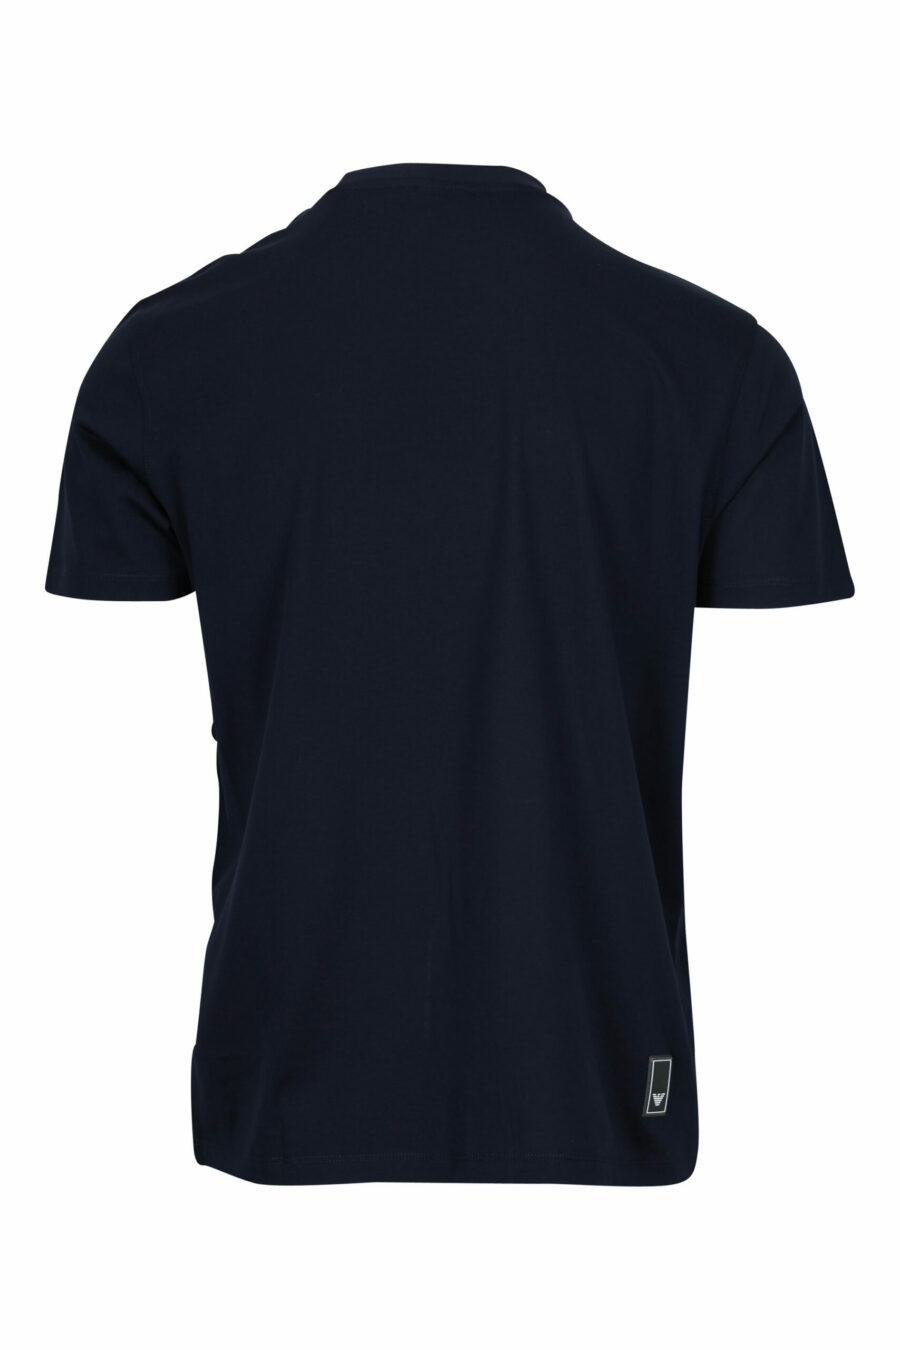 Dark blue T-shirt with eagle minilogue - 8058997155687 1 scaled